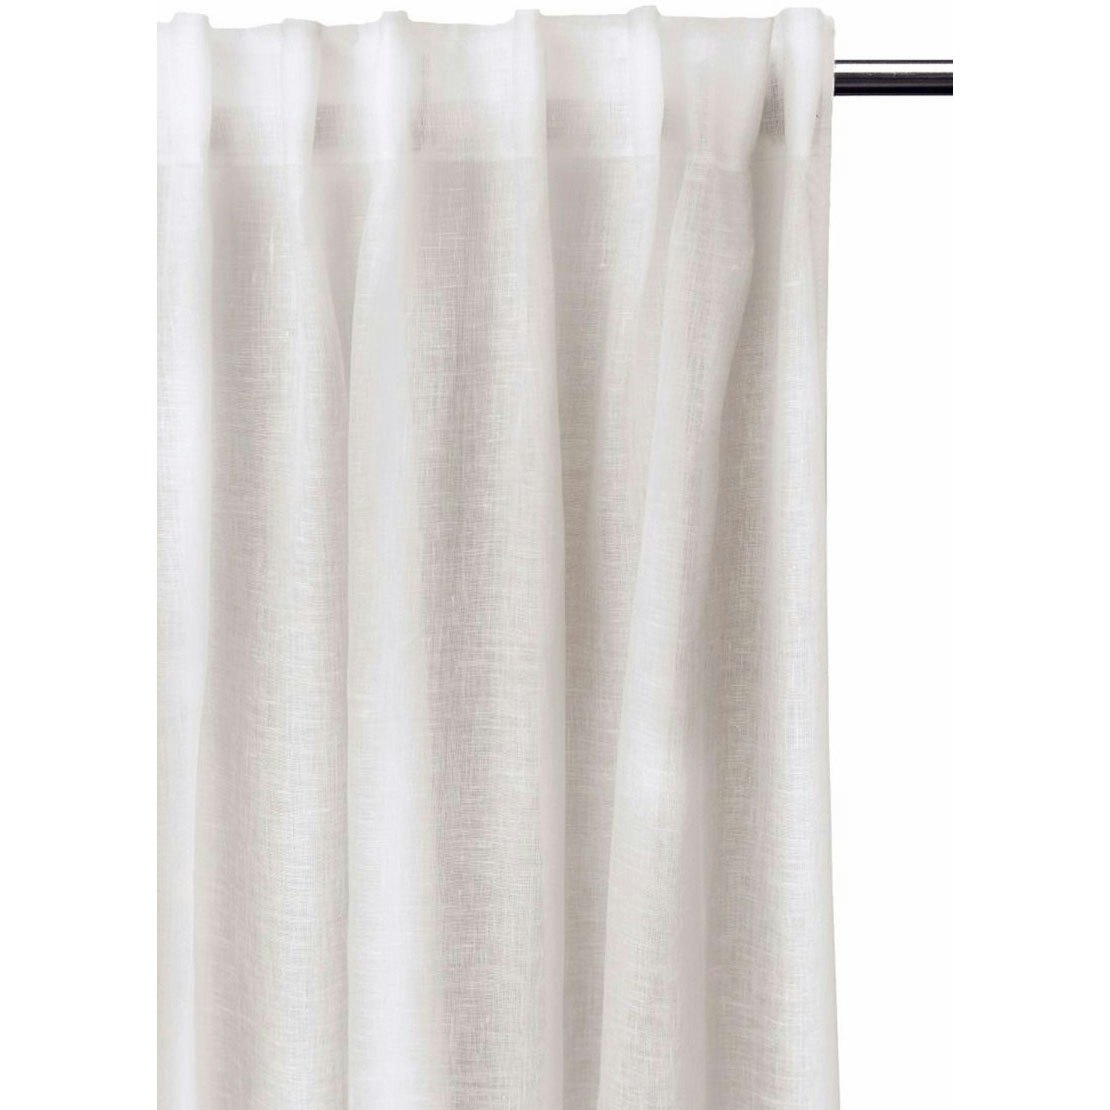 Dalsland Curtain With Heading Tape 145x290 cm, White